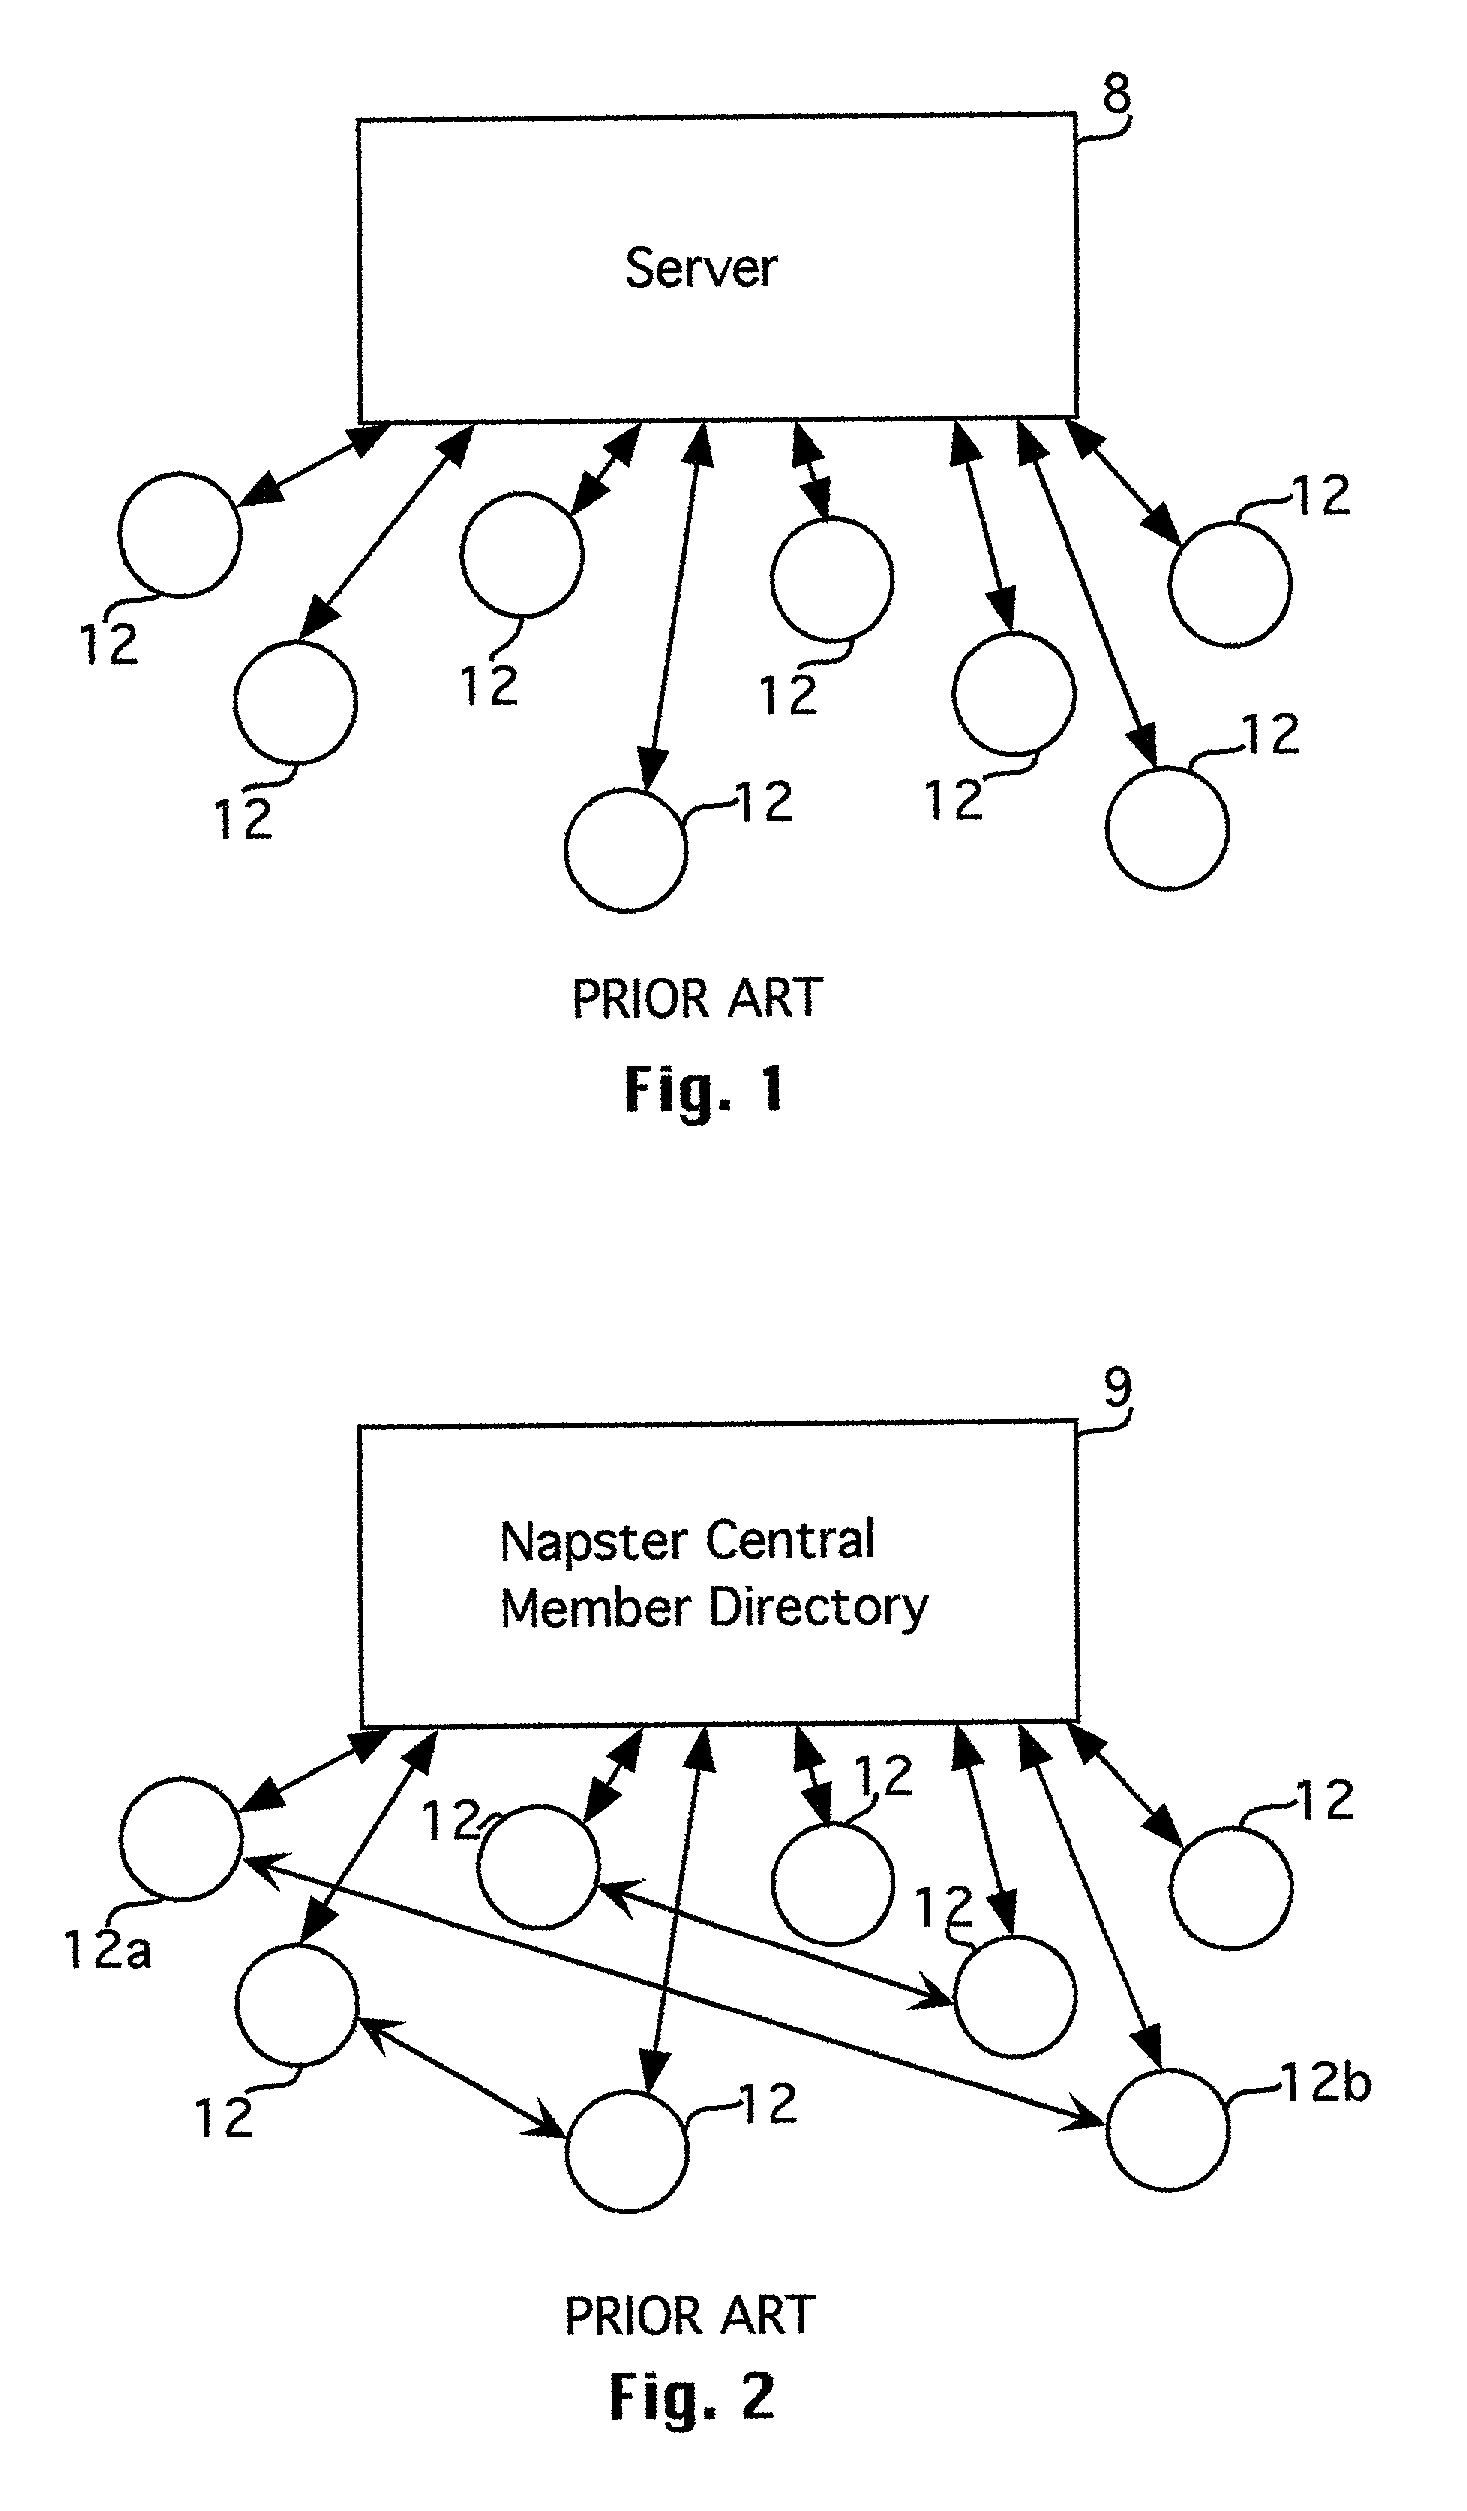 System of distributing content data over a computer network and method of arranging nodes for distribution of data over a computer network